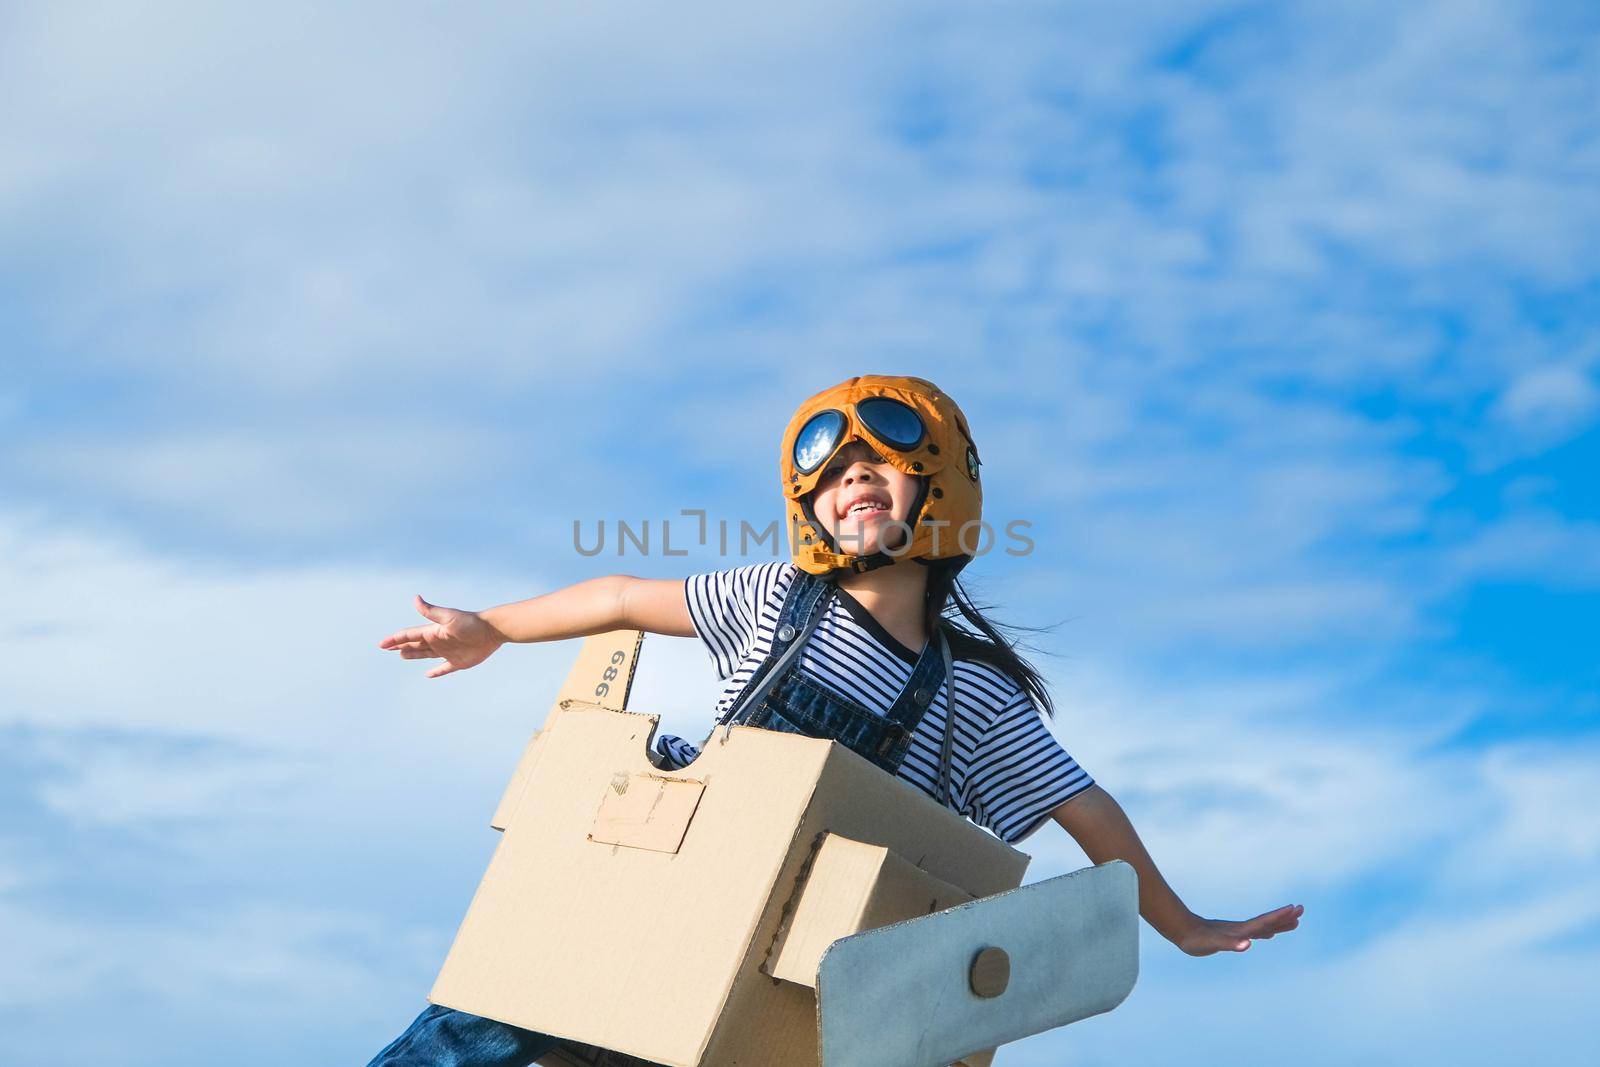 Cute dreamer little girl playing with cardboard planes against blue summer sky background. Happy kid running through the meadow on a sunny day with cardboard plane.  Childhood dream imagination concep by TEERASAK